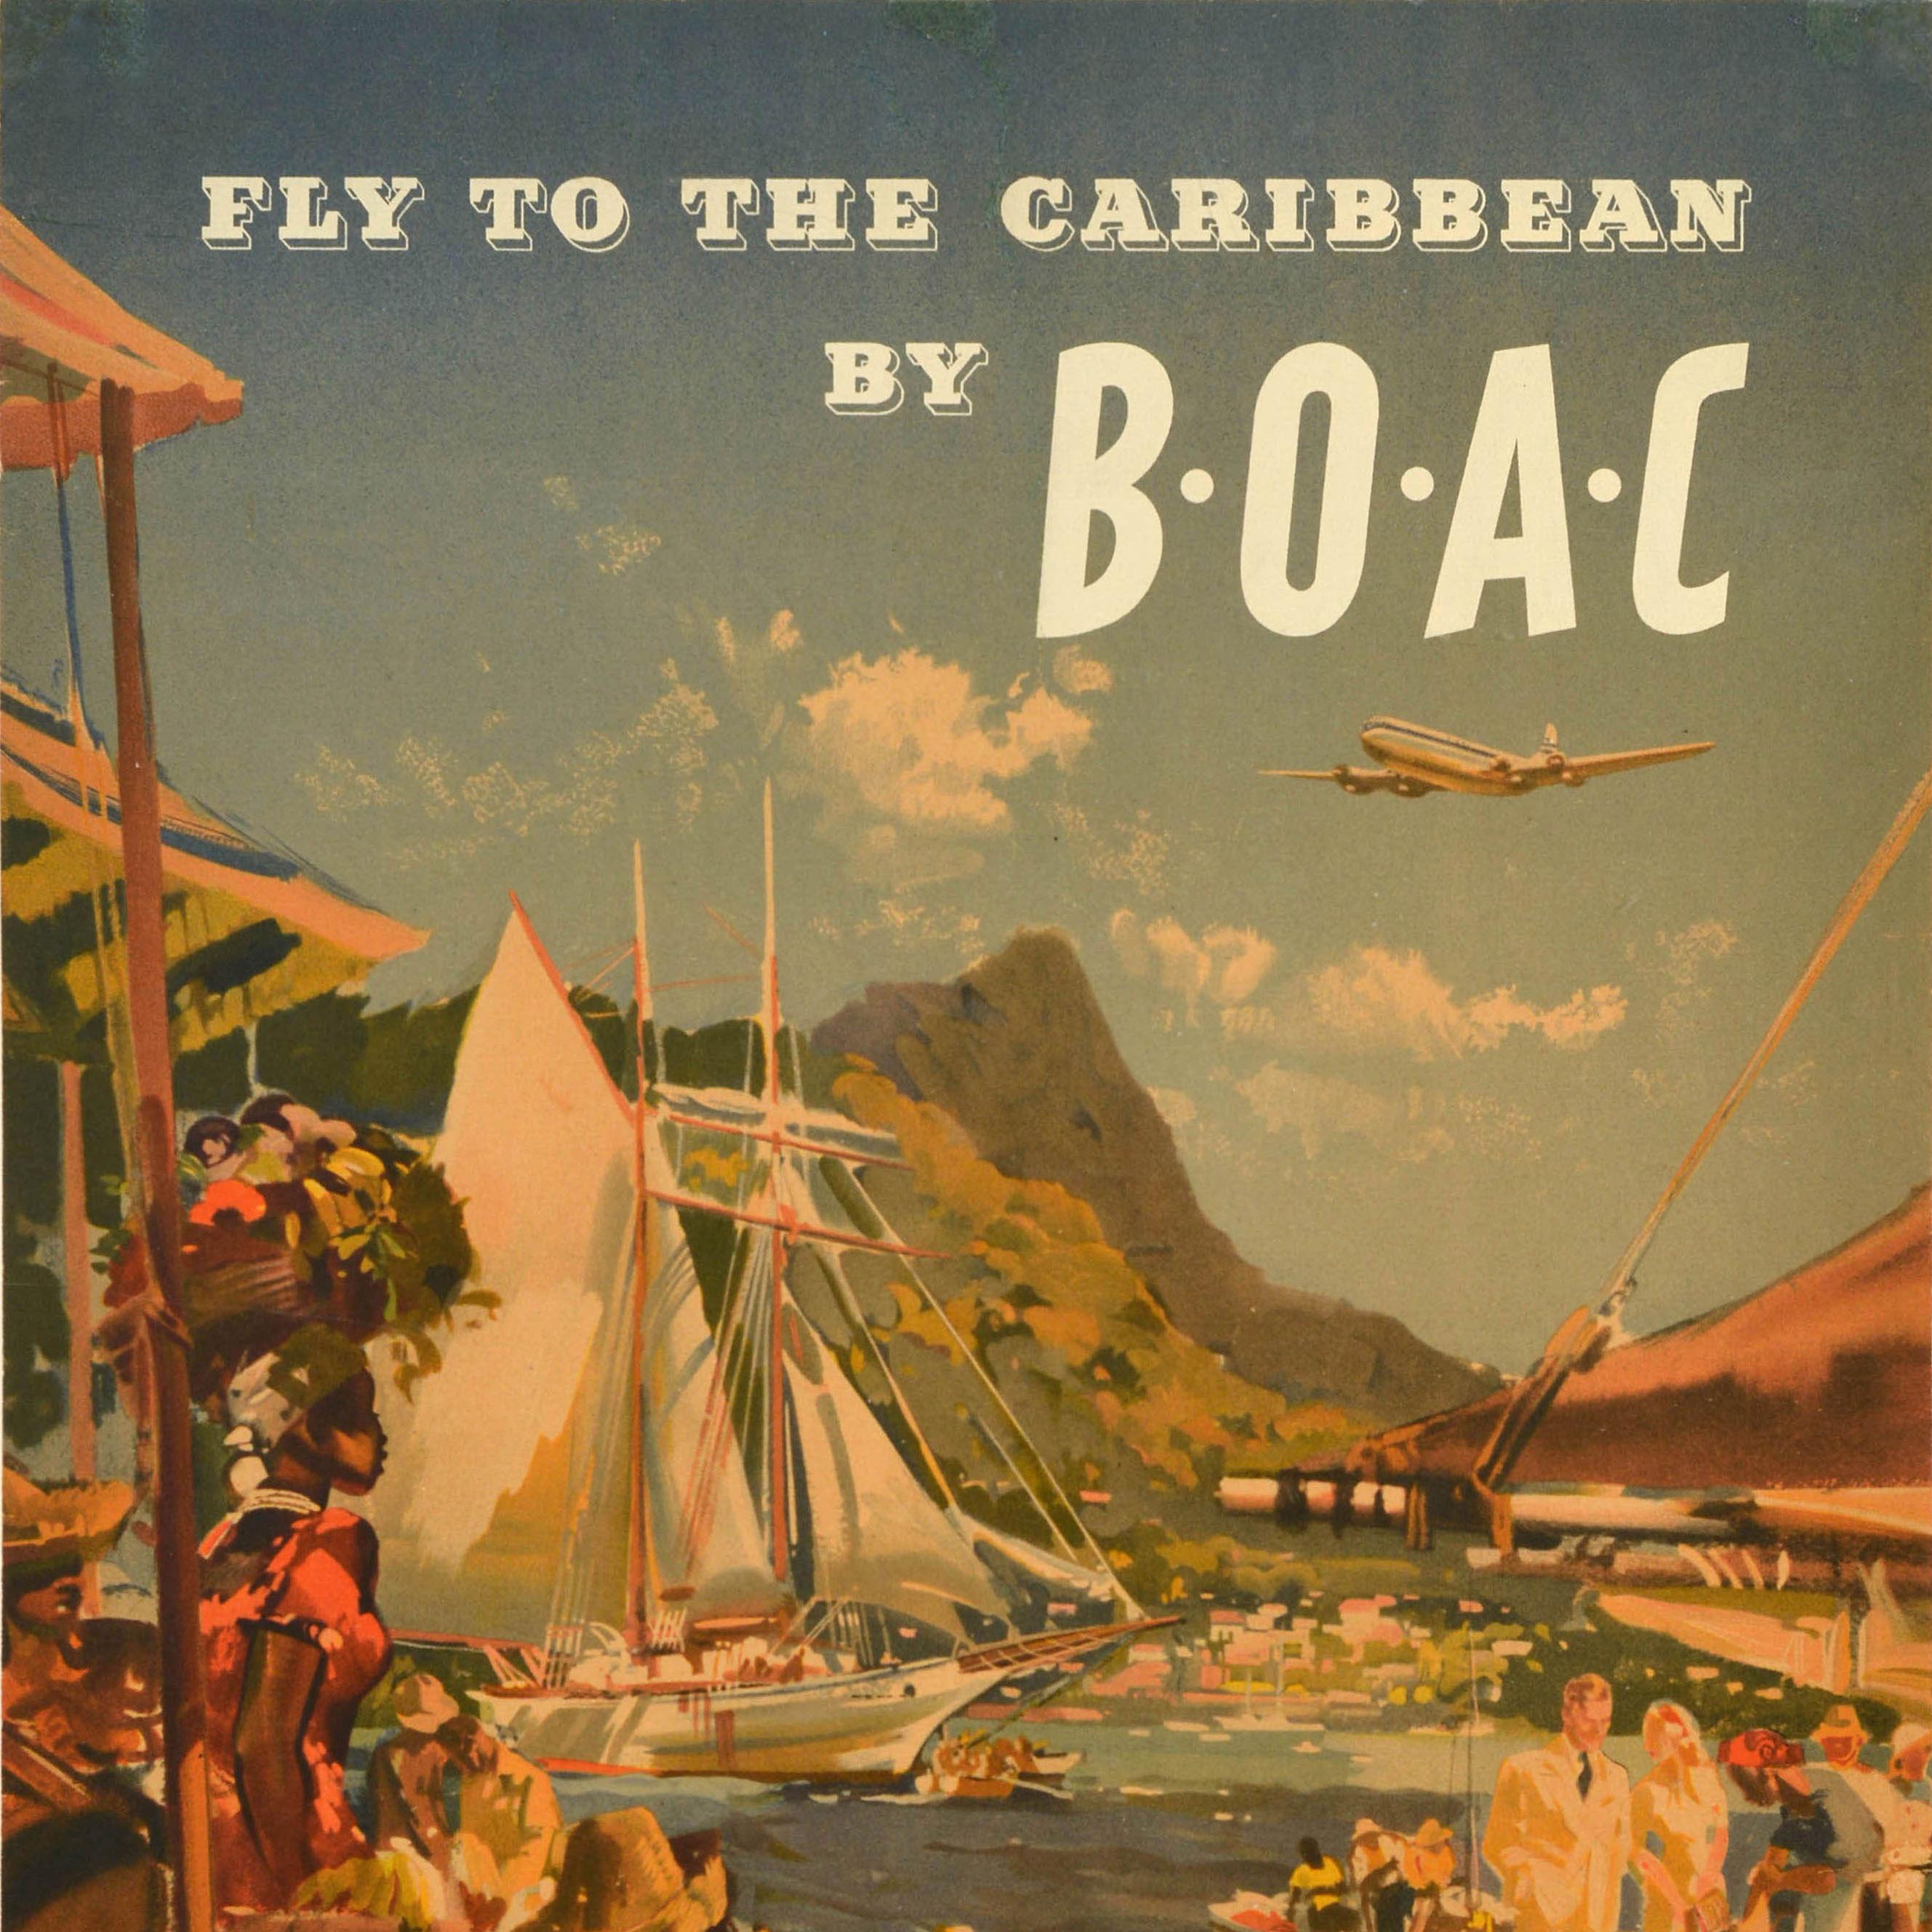 Original Vintage Travel Advertising Poster Fly To The Caribbean By BOAC Wootton - Print by Frank Wootton